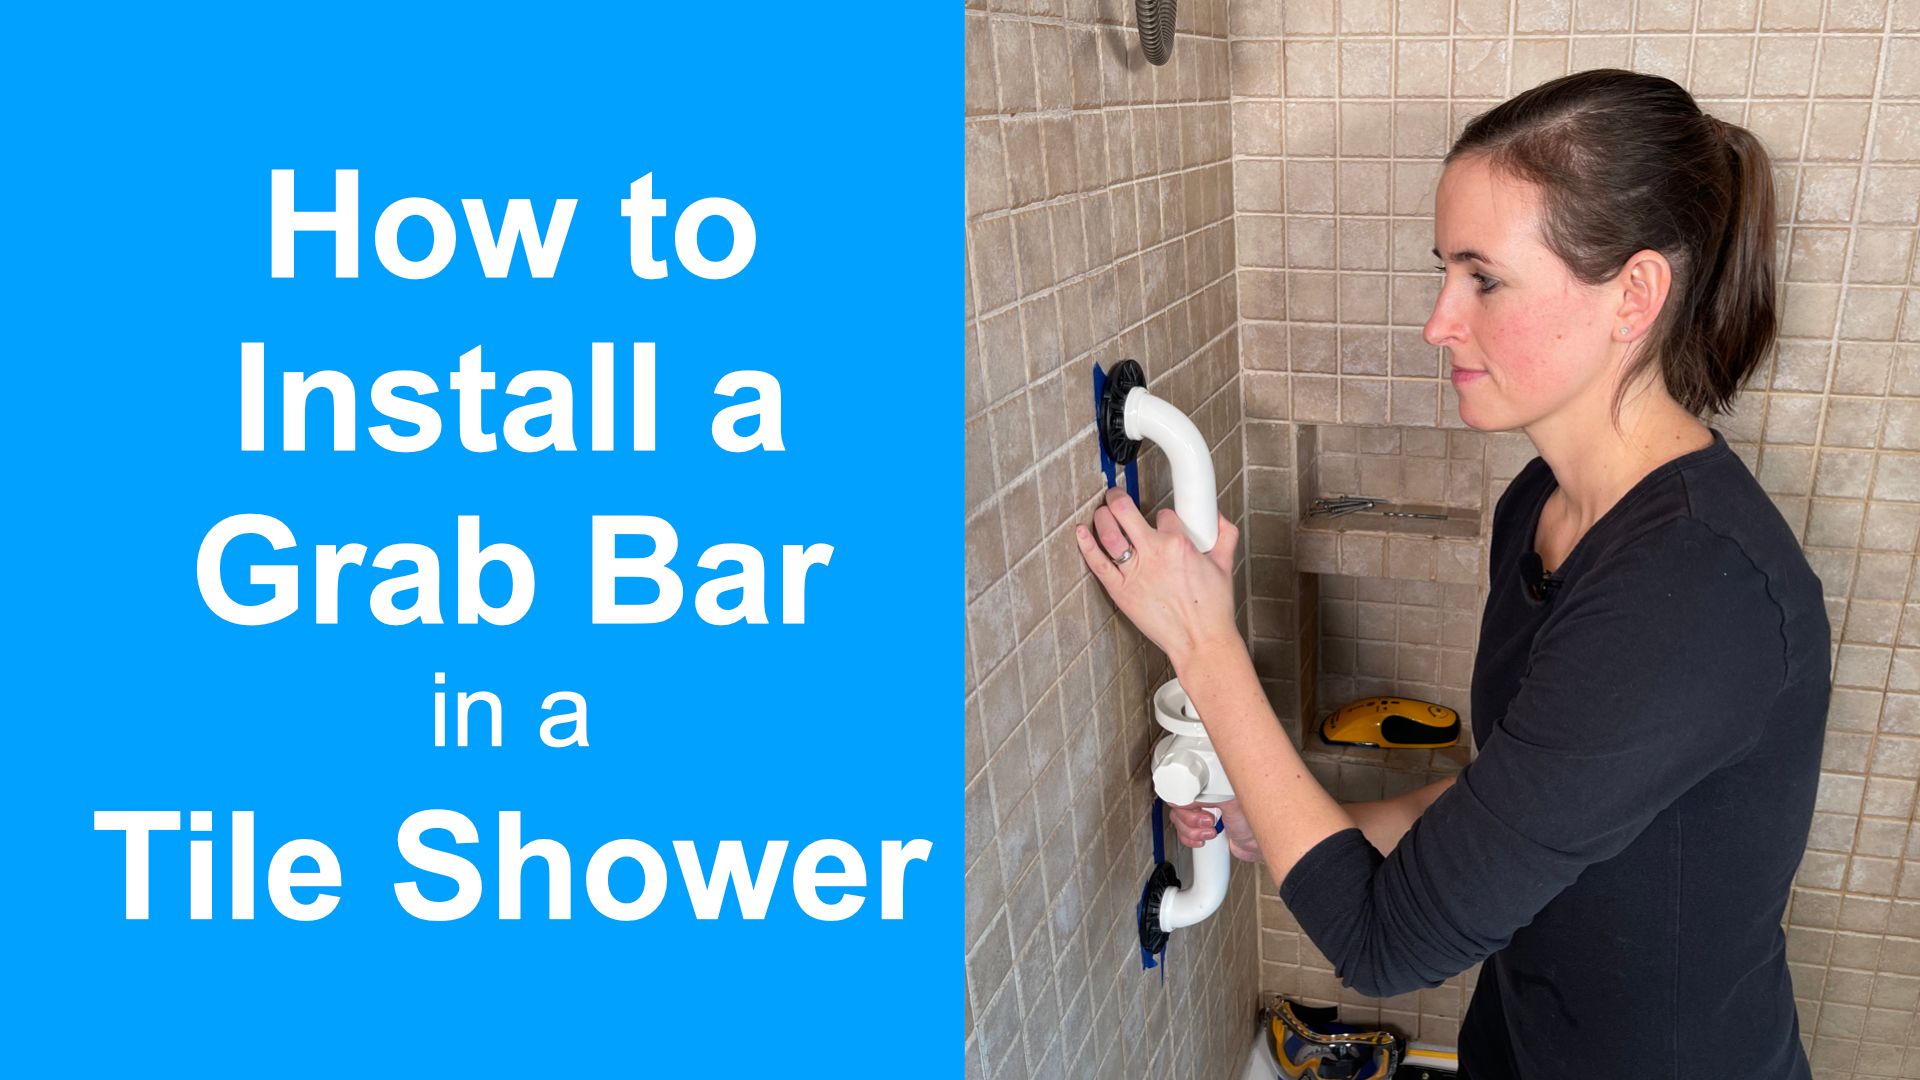 How To Install A Grab Bar In Tile Shower Equipmeot - How To Install Bathroom Grab Bars On Tile